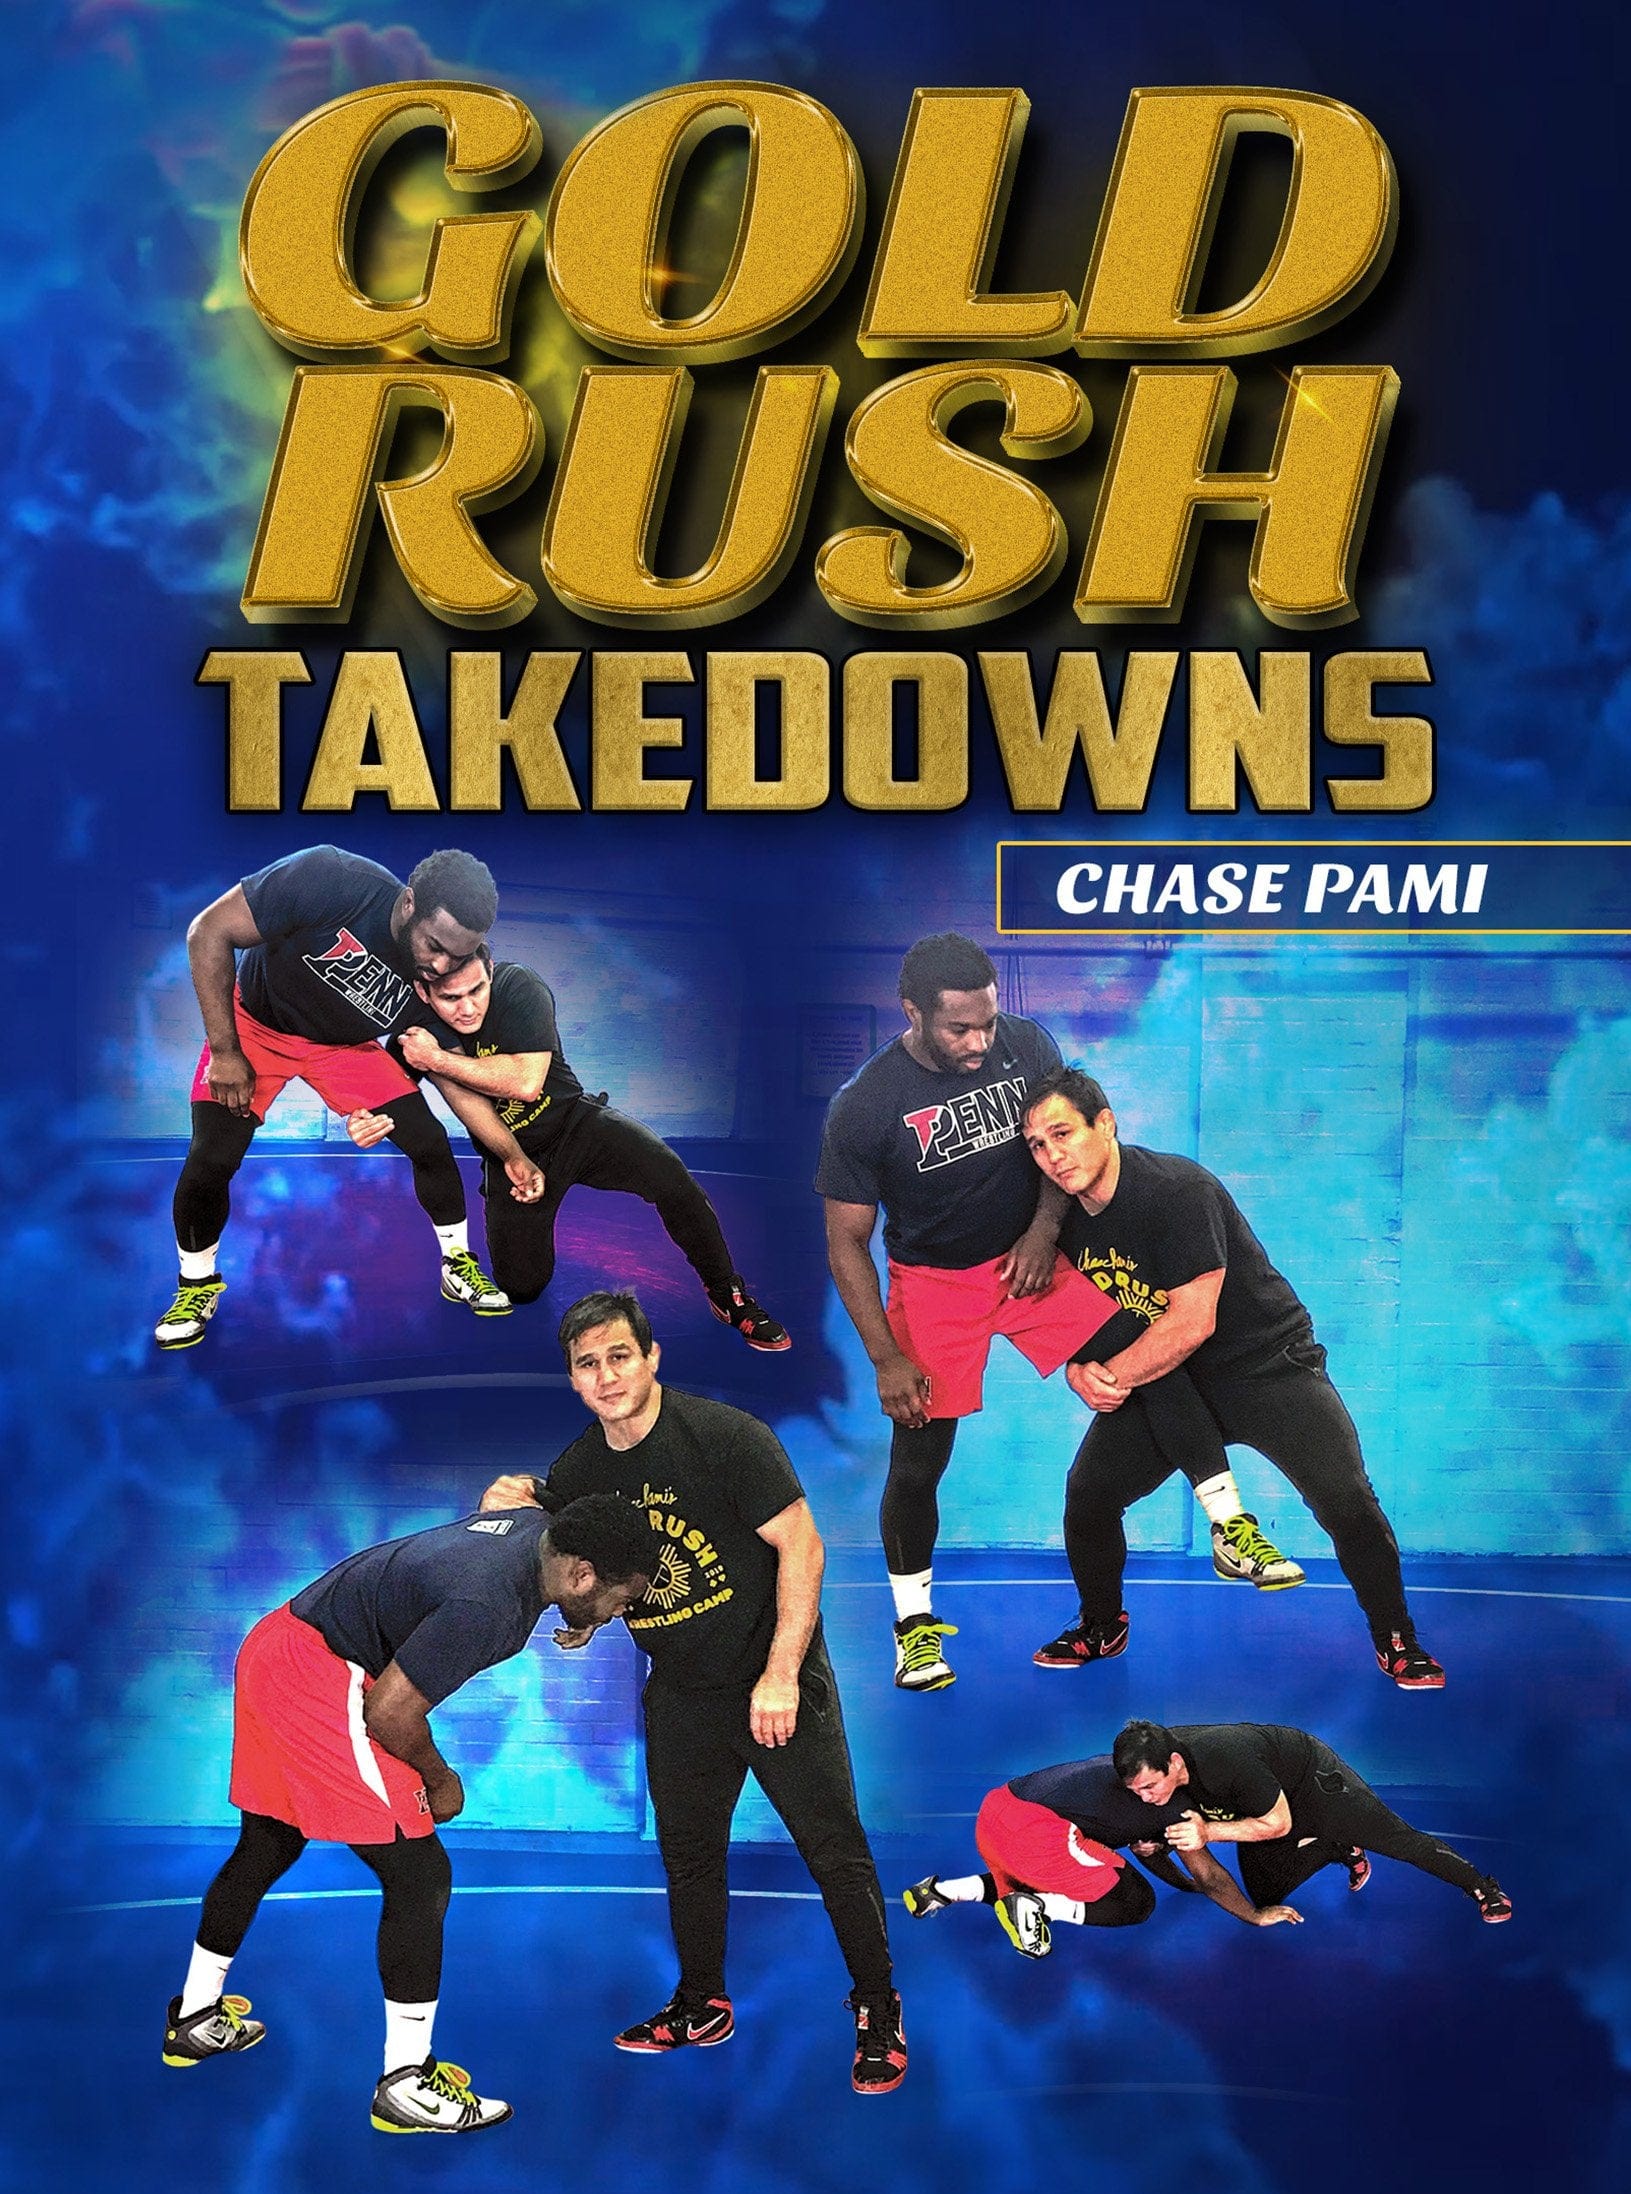 Gold Rush Takedowns by Chase Pami - Fanatic Wrestling